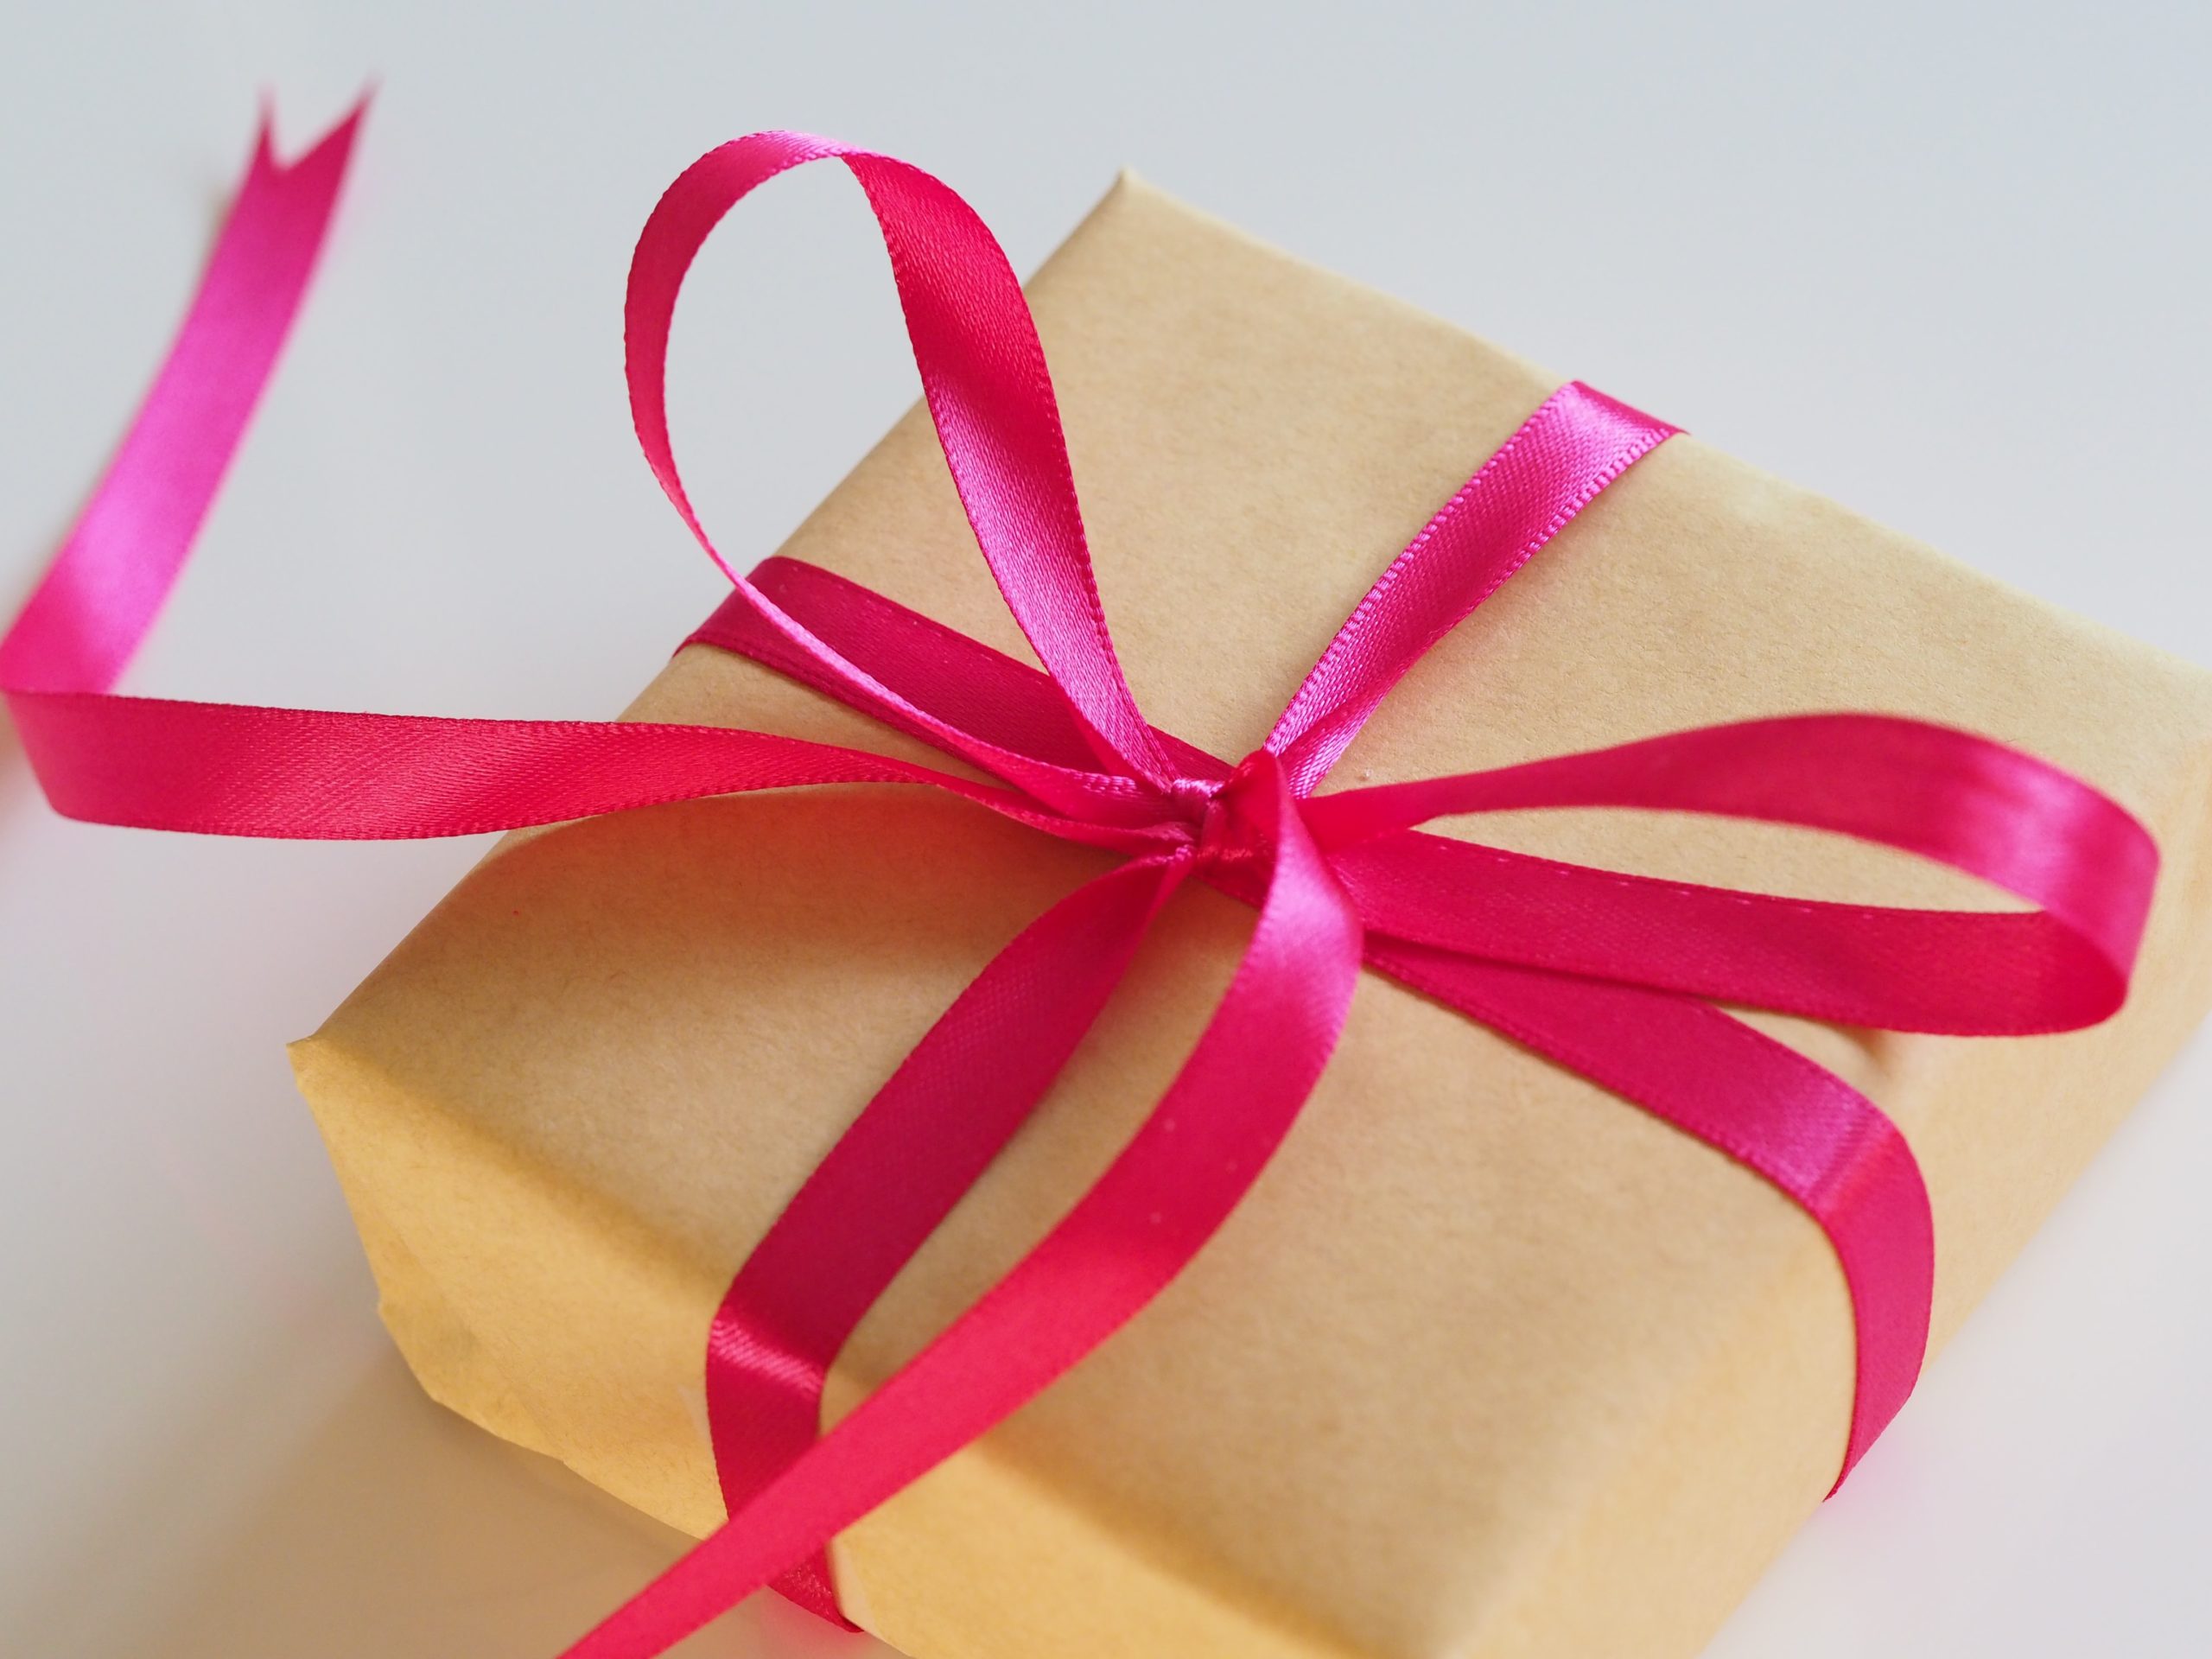 14 Free Gifts for Real Estate Marketing That Will Get You a Referral